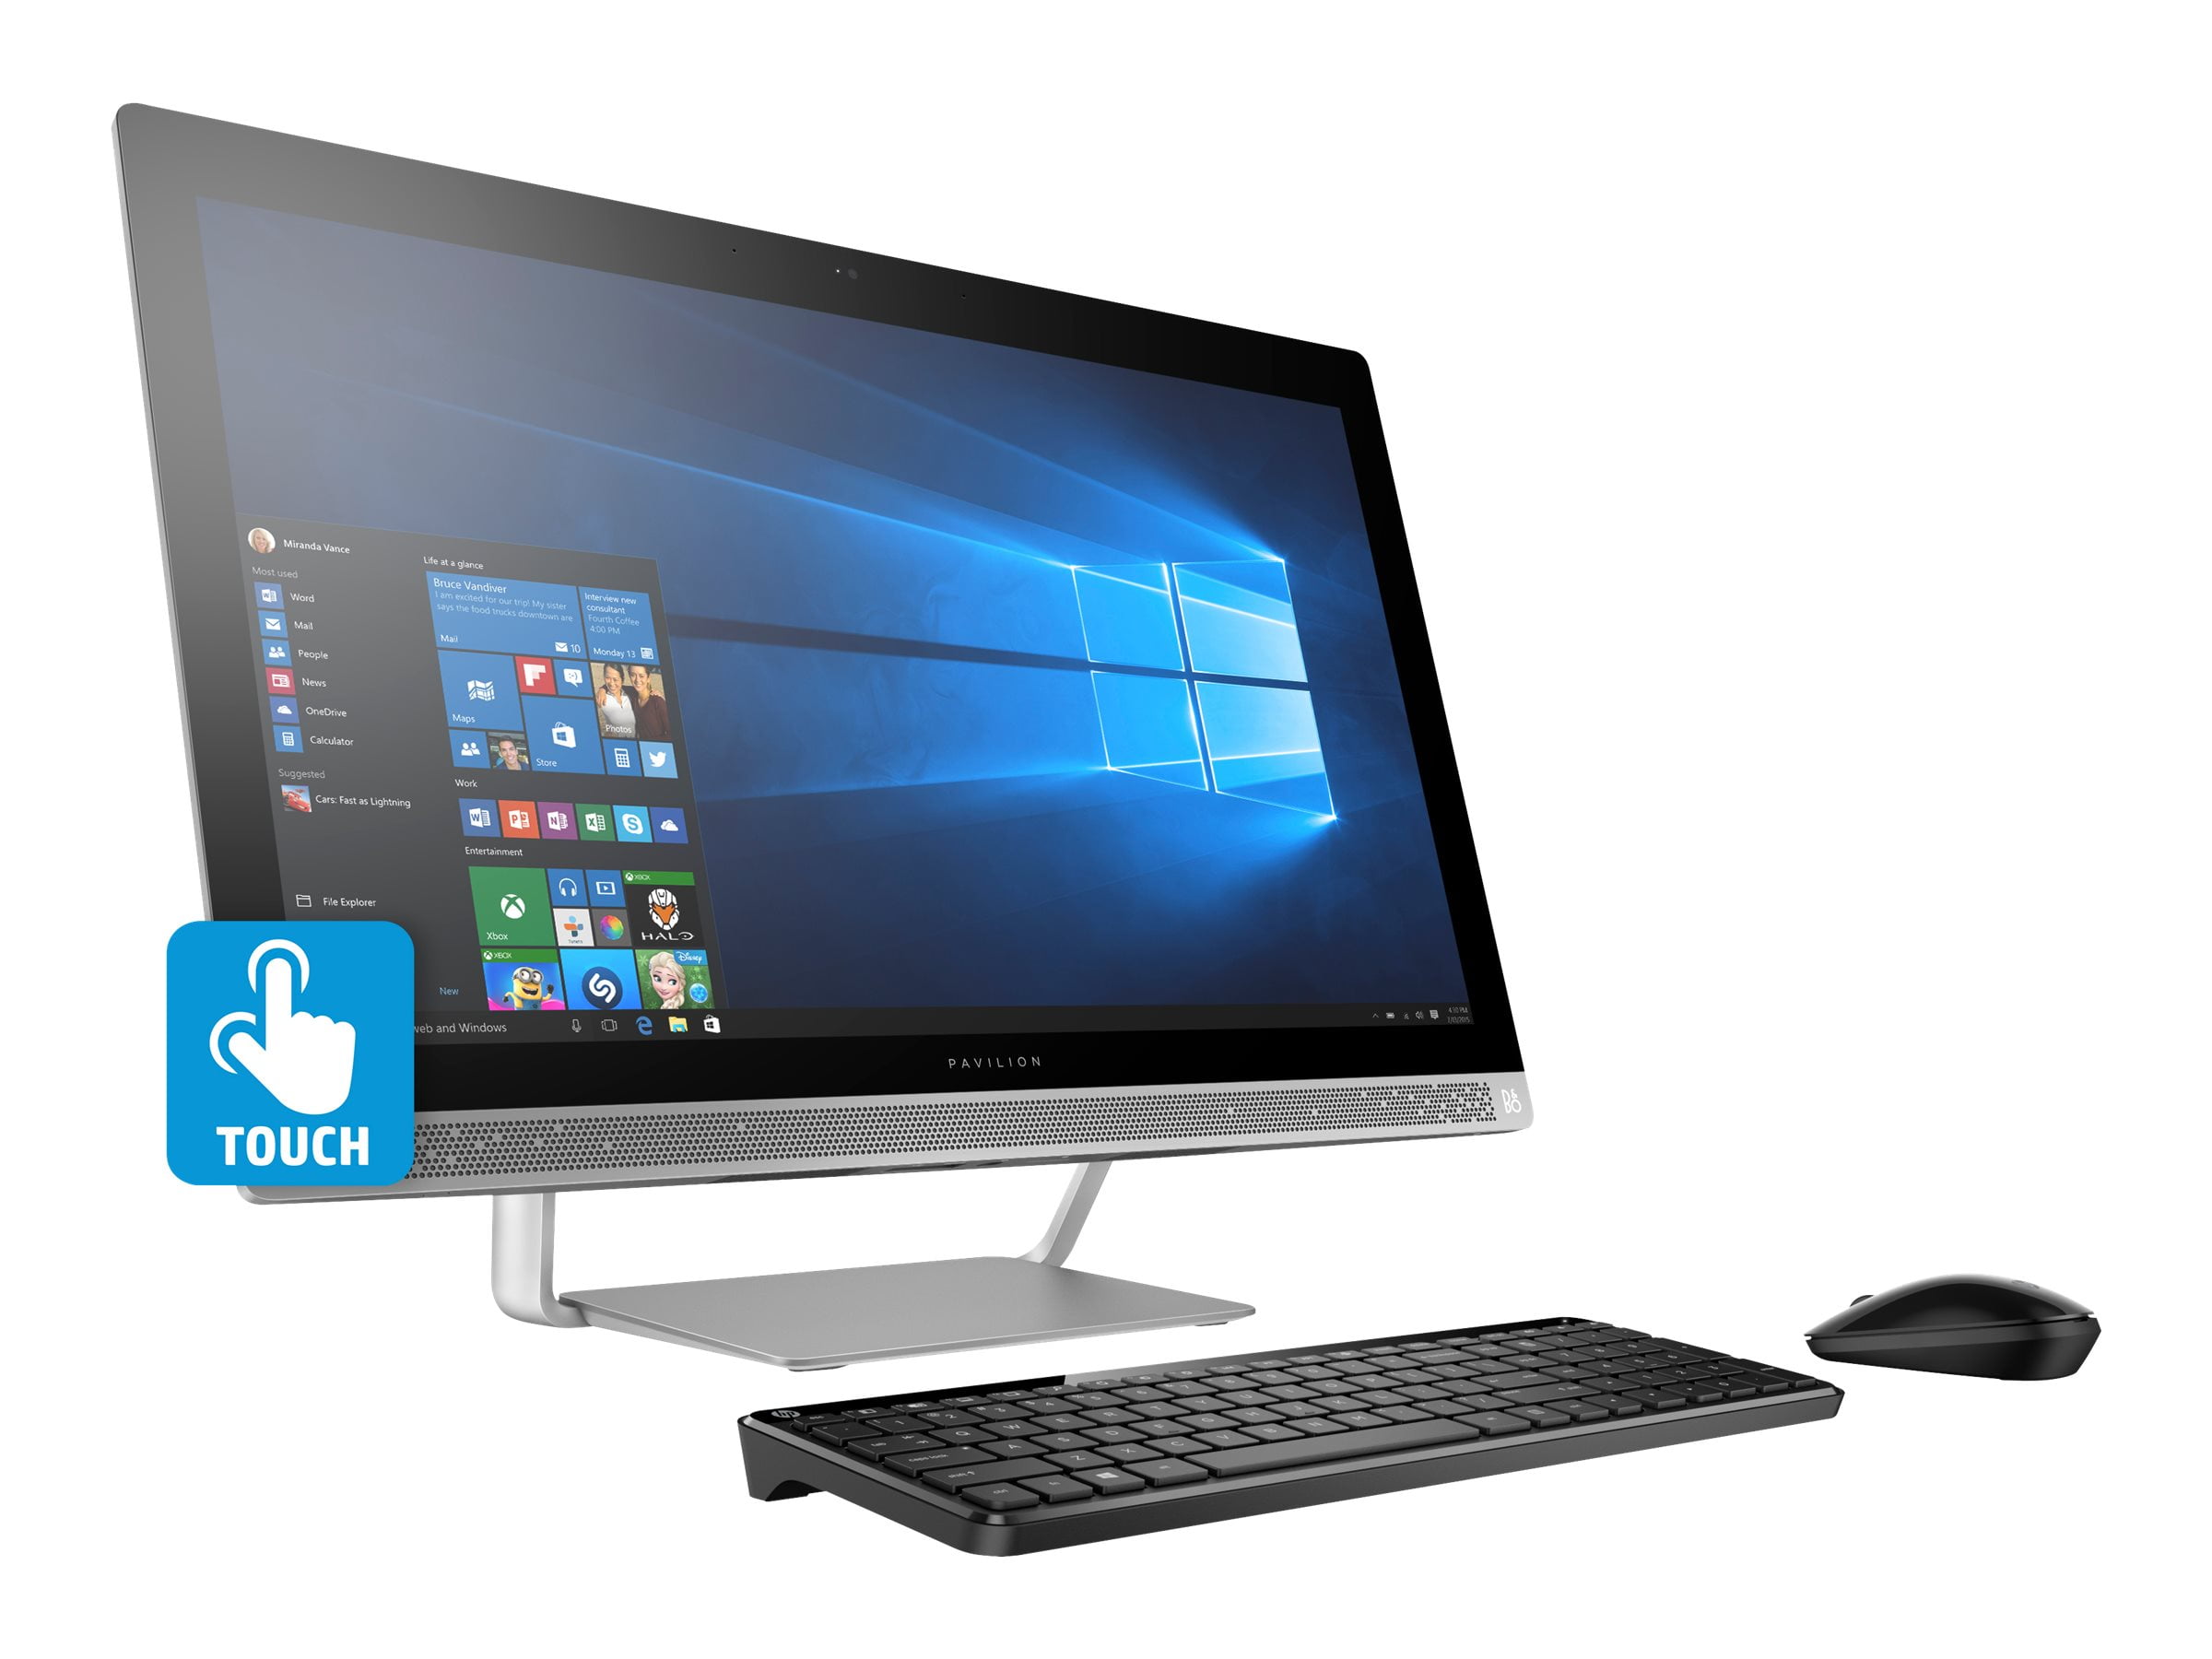 HP Pavilion 27-a230 All-in-One Desktop PC with Intel Core i5-7400T